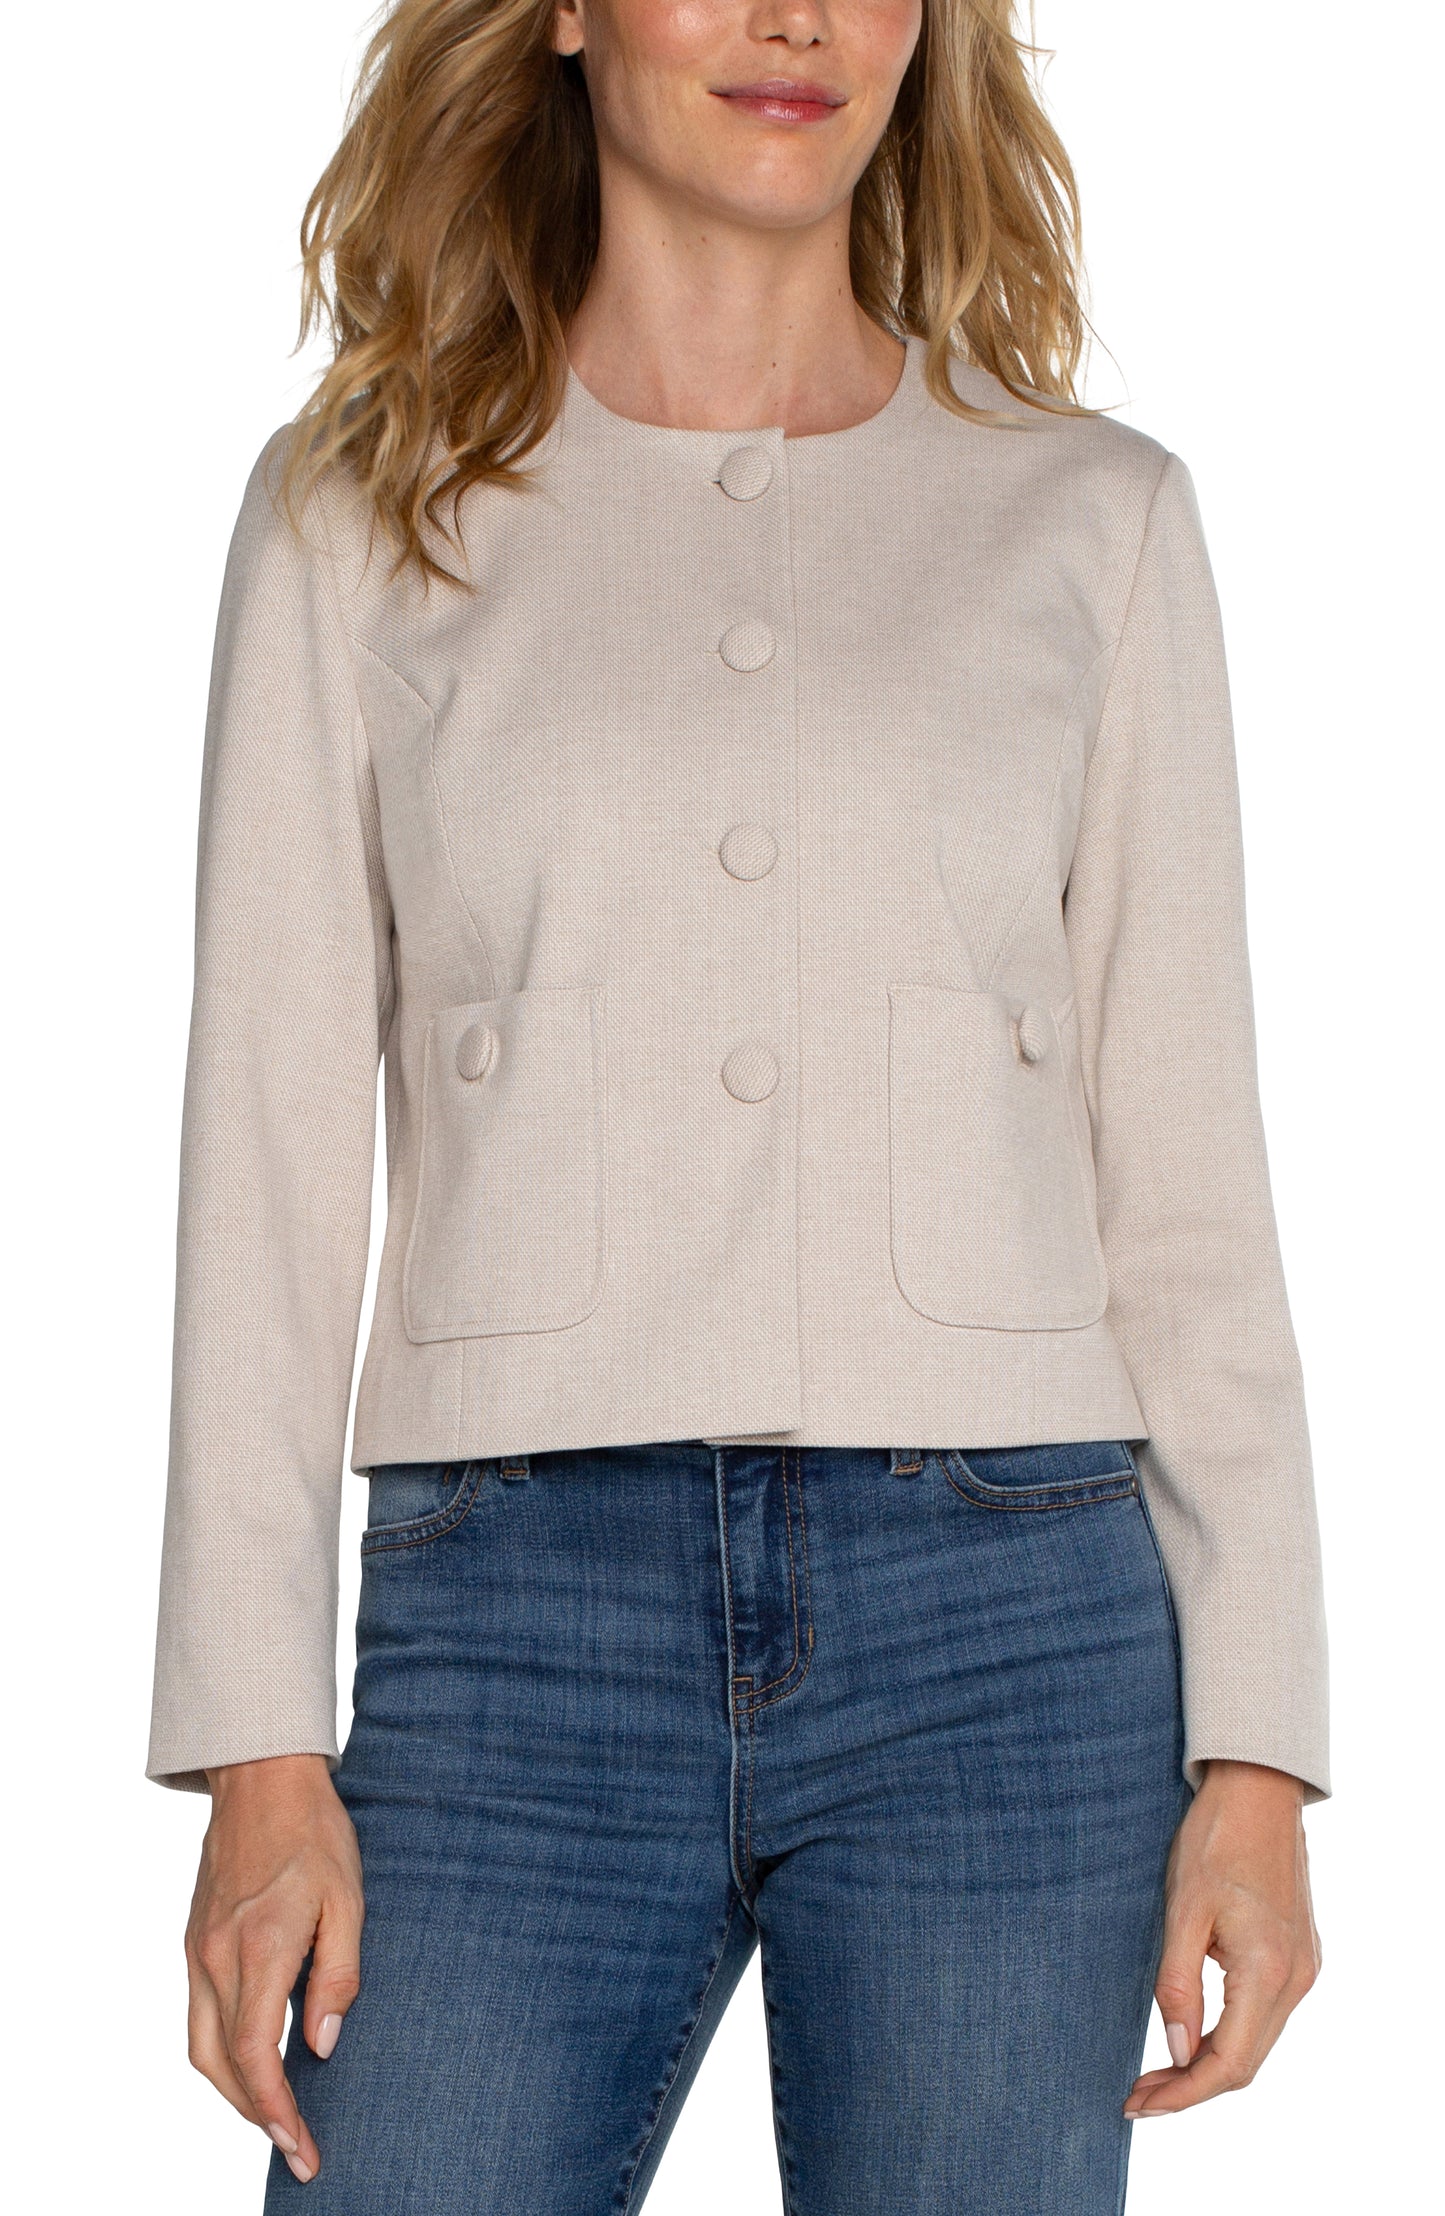 Liverpool Boxy Cropped Jacket with Covered Buttons (Stone/Tan)